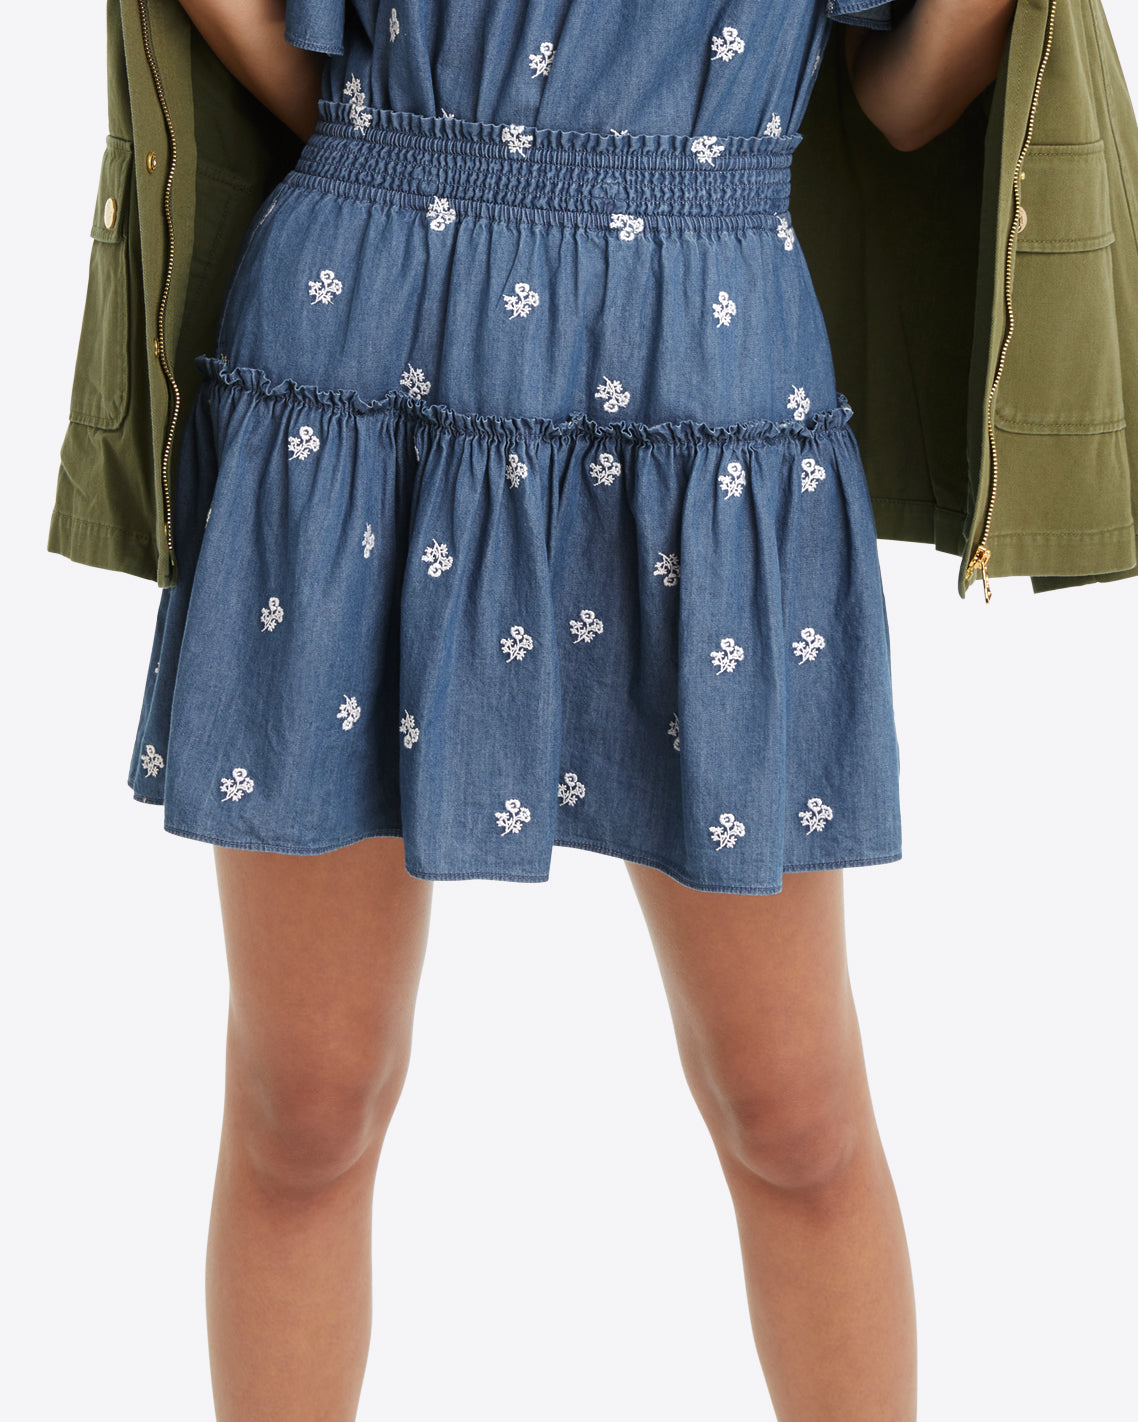 Pull on Skirt in Embroidered Chambray